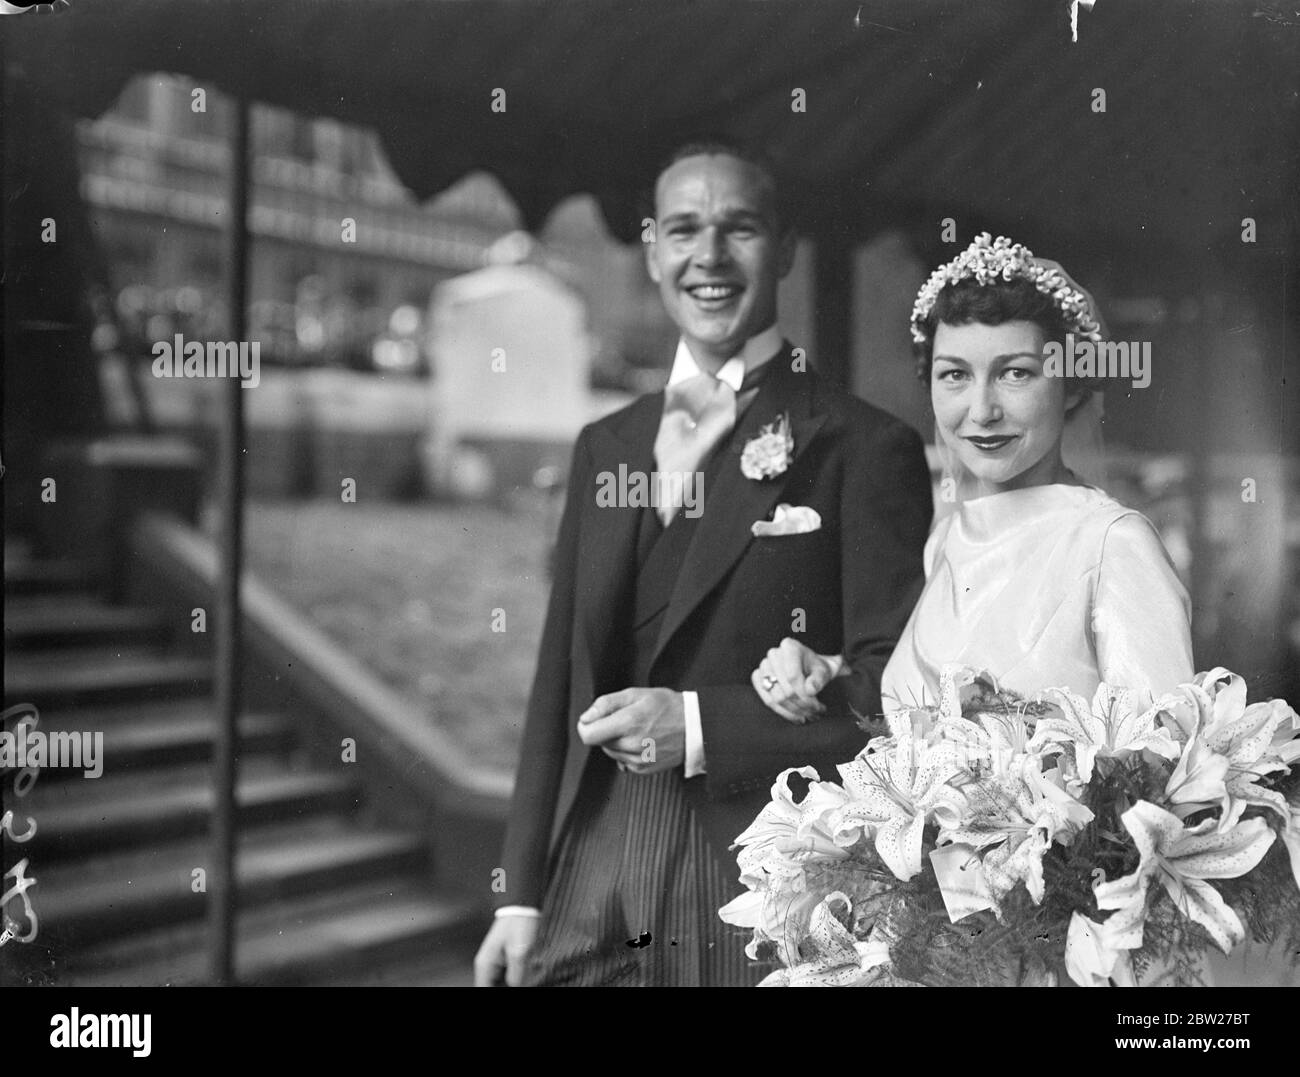 The bride and groom leaving the cathedral after the ceremony. Miss Elizabeth Coates, daughter of Sir Clive and Lady Celia Coates, was married to Mr William Harris at Southwark Cathedral. The Archbishop of York and the master of the temple assisted at the ceremony. 15 July 1937. Stock Photo